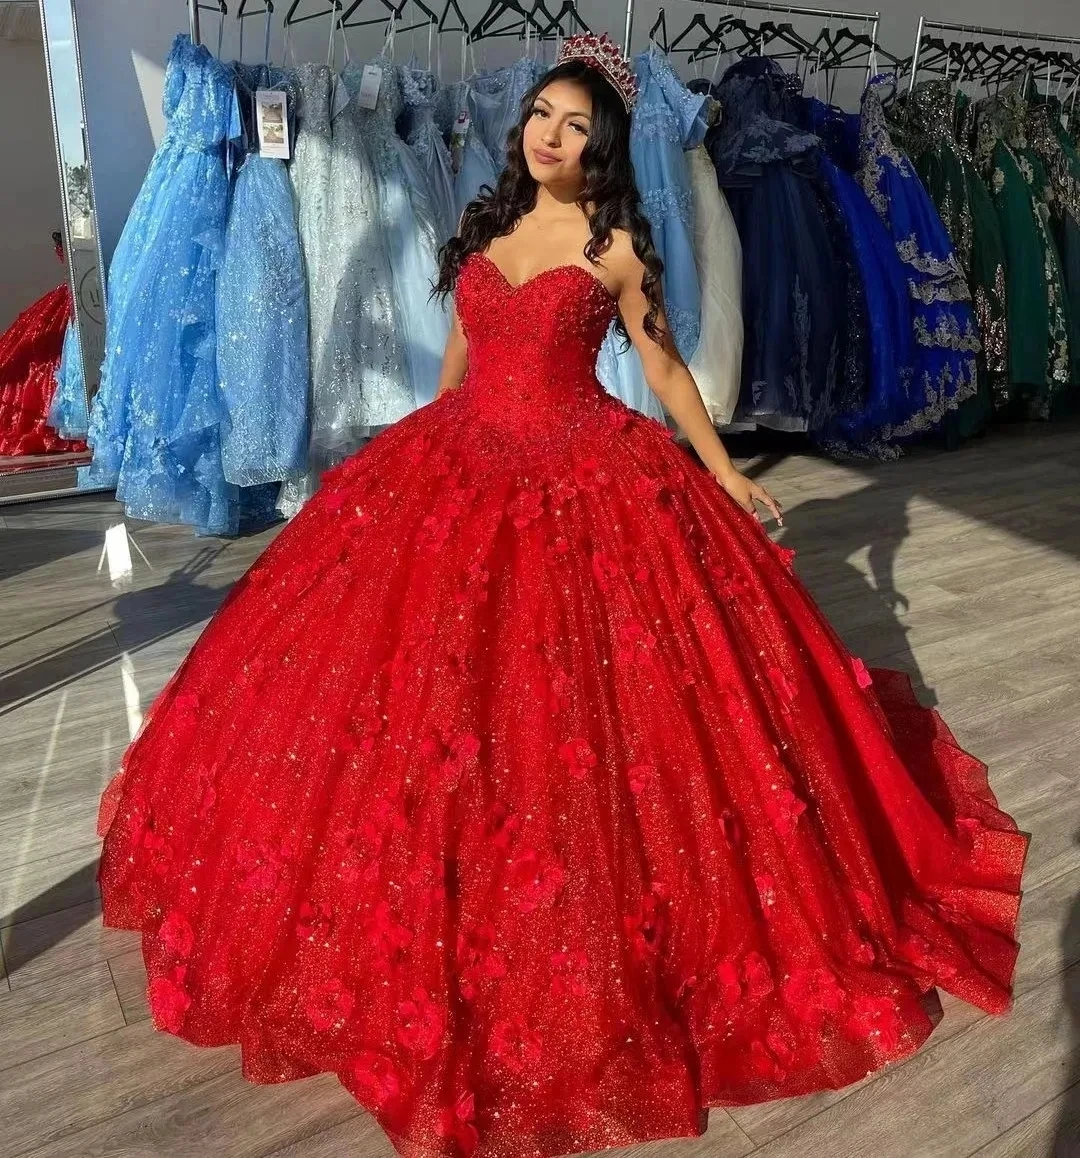 

ANGELSBRIDEP Sparkly Red Ball Gown Quinceanera Dresses Vestidos De Festa 3D Flower Beading Formal Birthday Party Gowns Corset